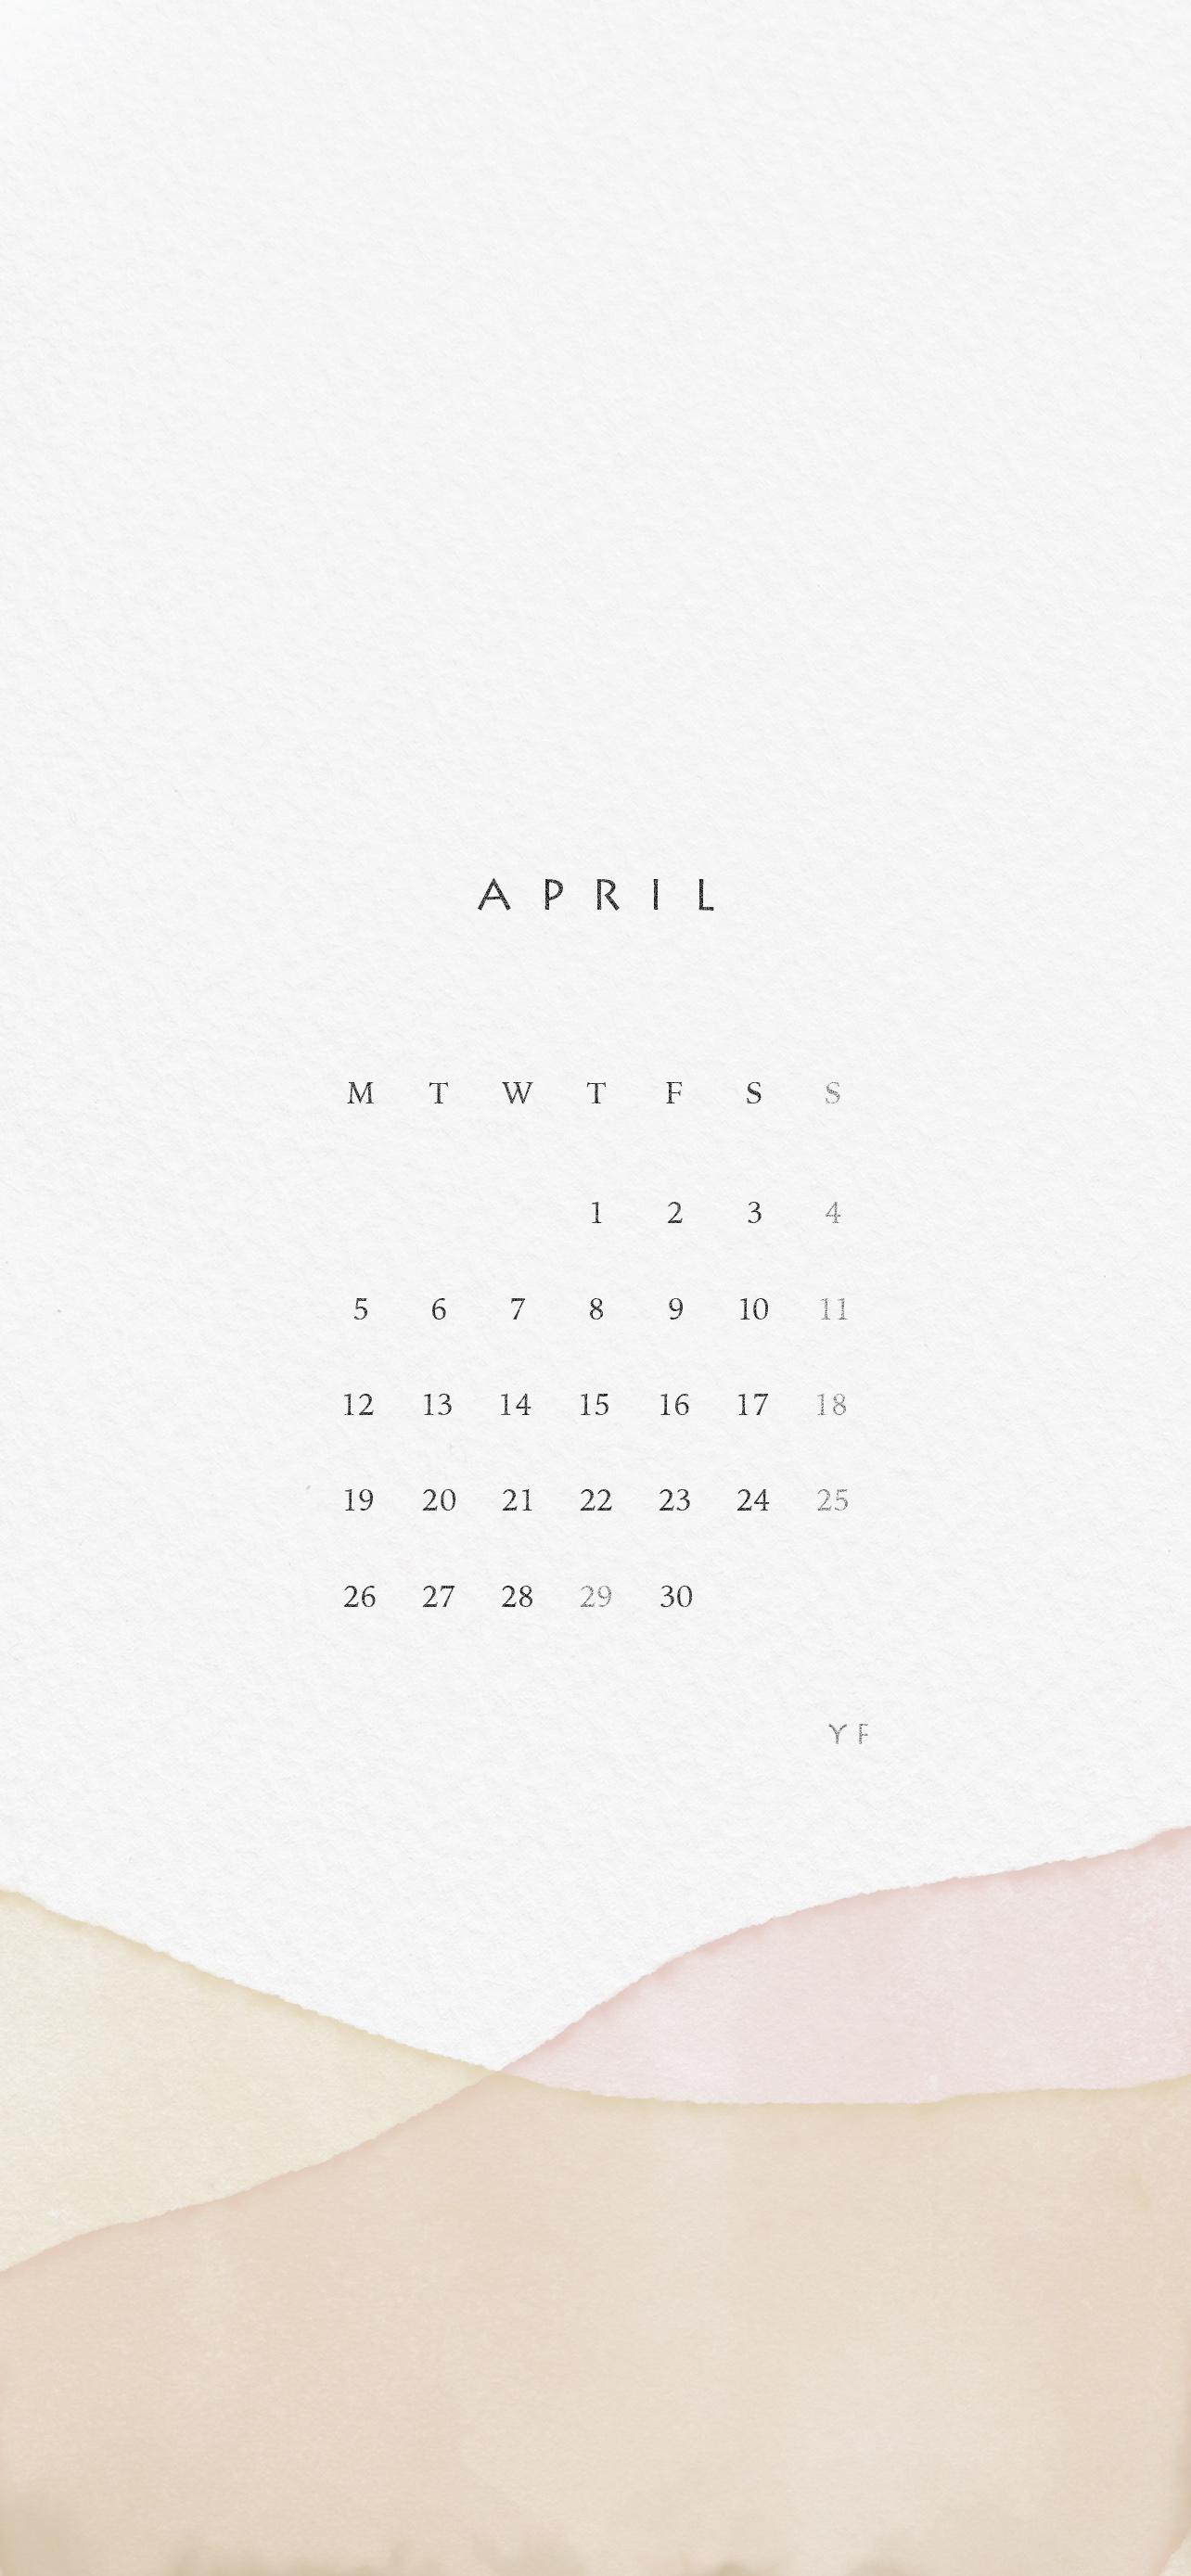 April 21 Calendar Wallpaper For The Iphone Designed By Yf